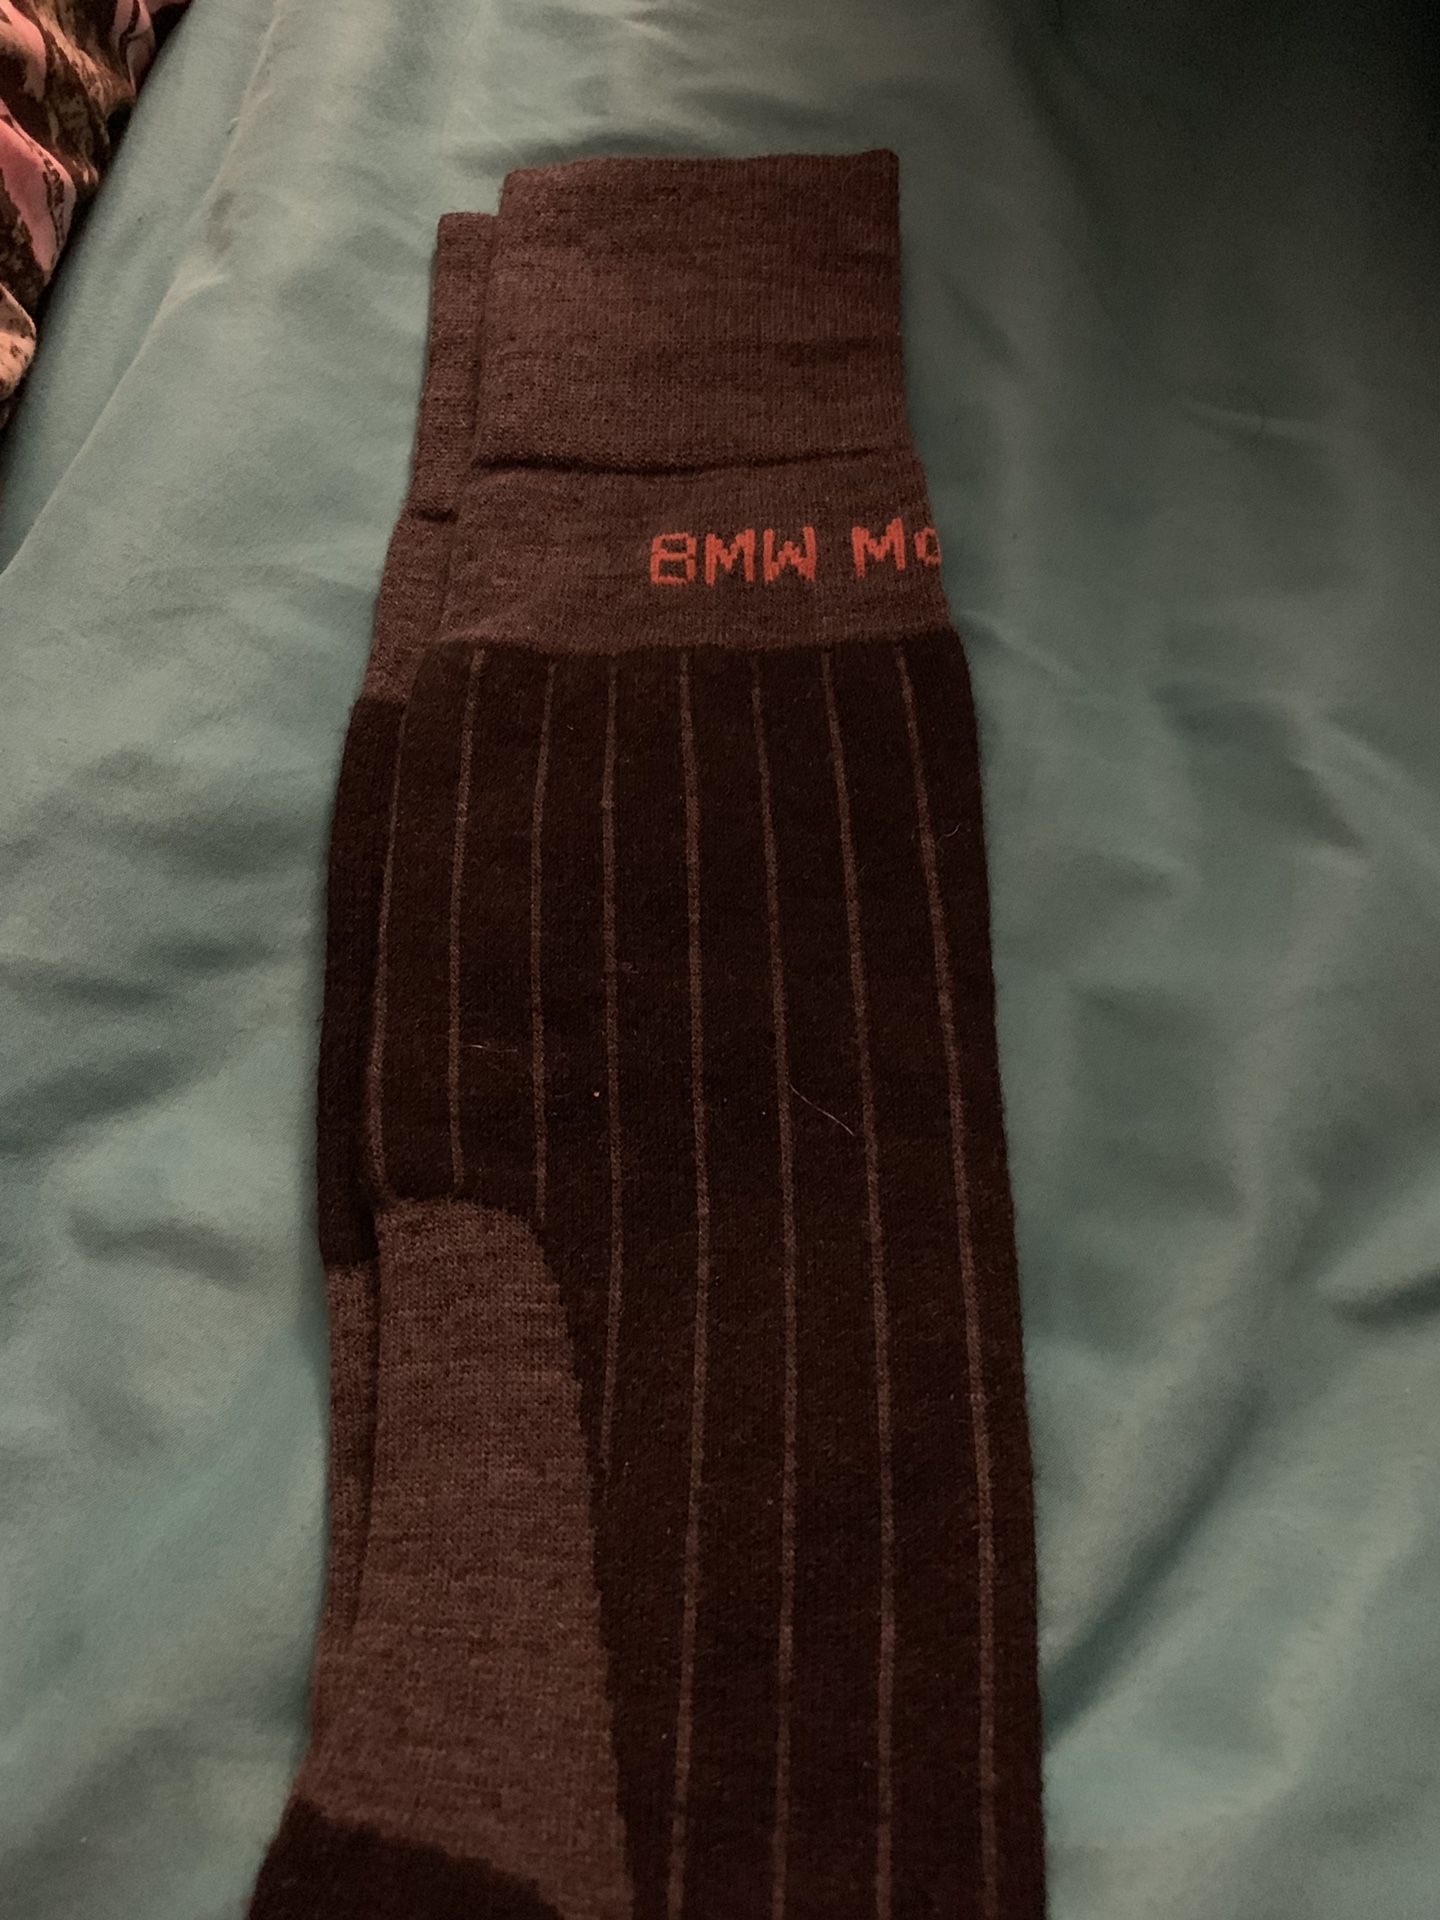 Really cool bmw motorcycle socks